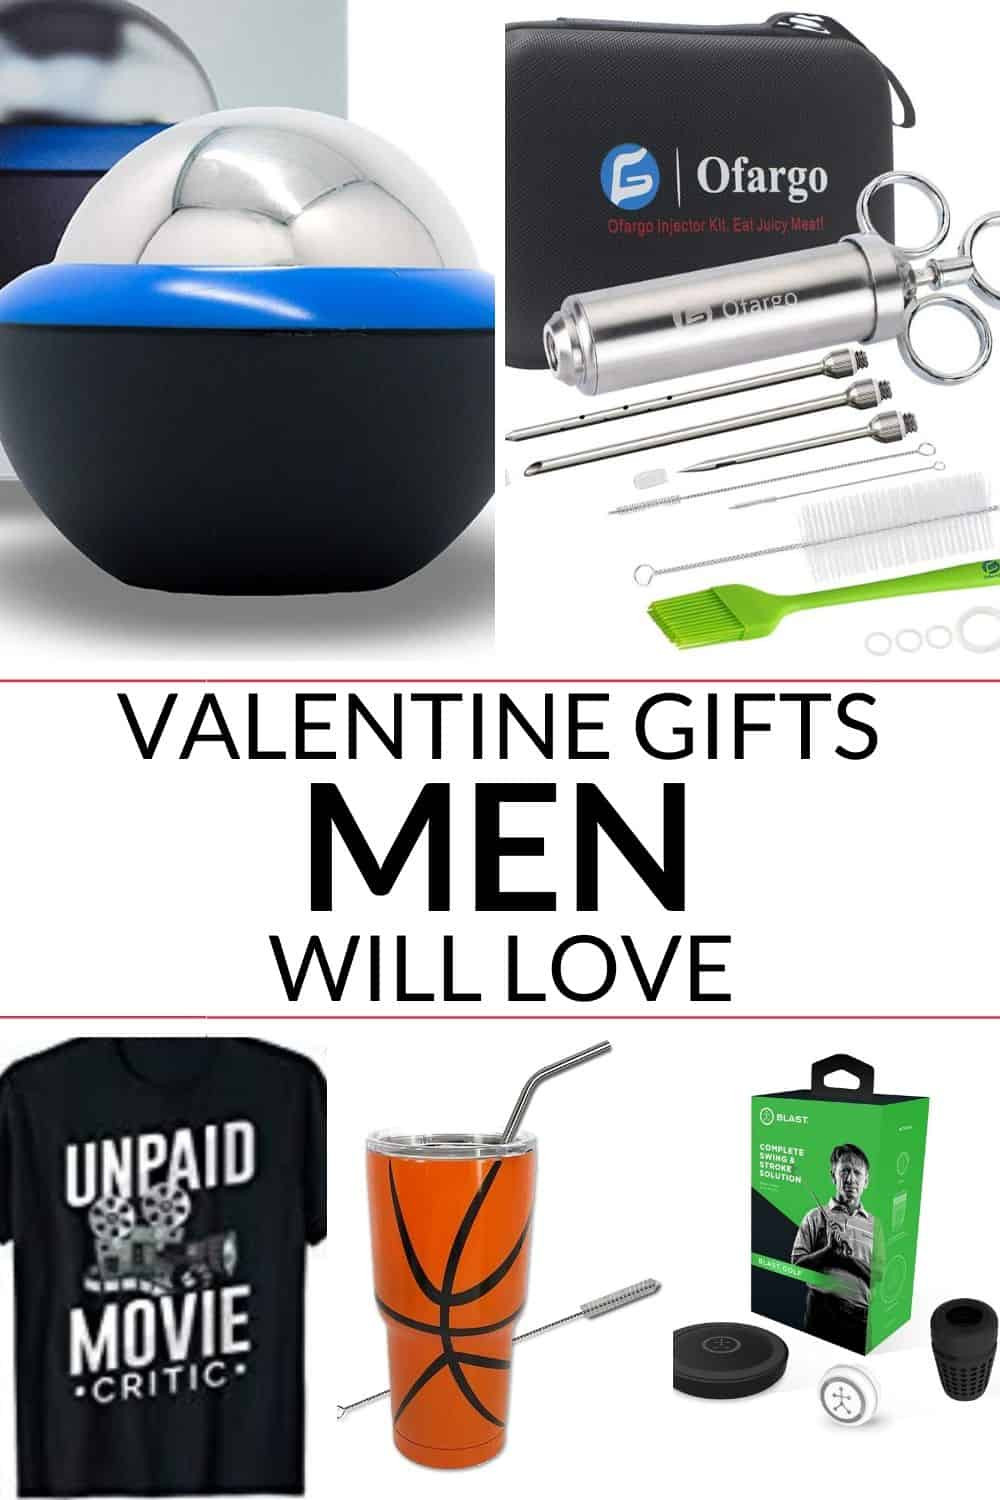 Valentine Gift For Husband Ideas
 Valentine Gift for Husband Great ideas